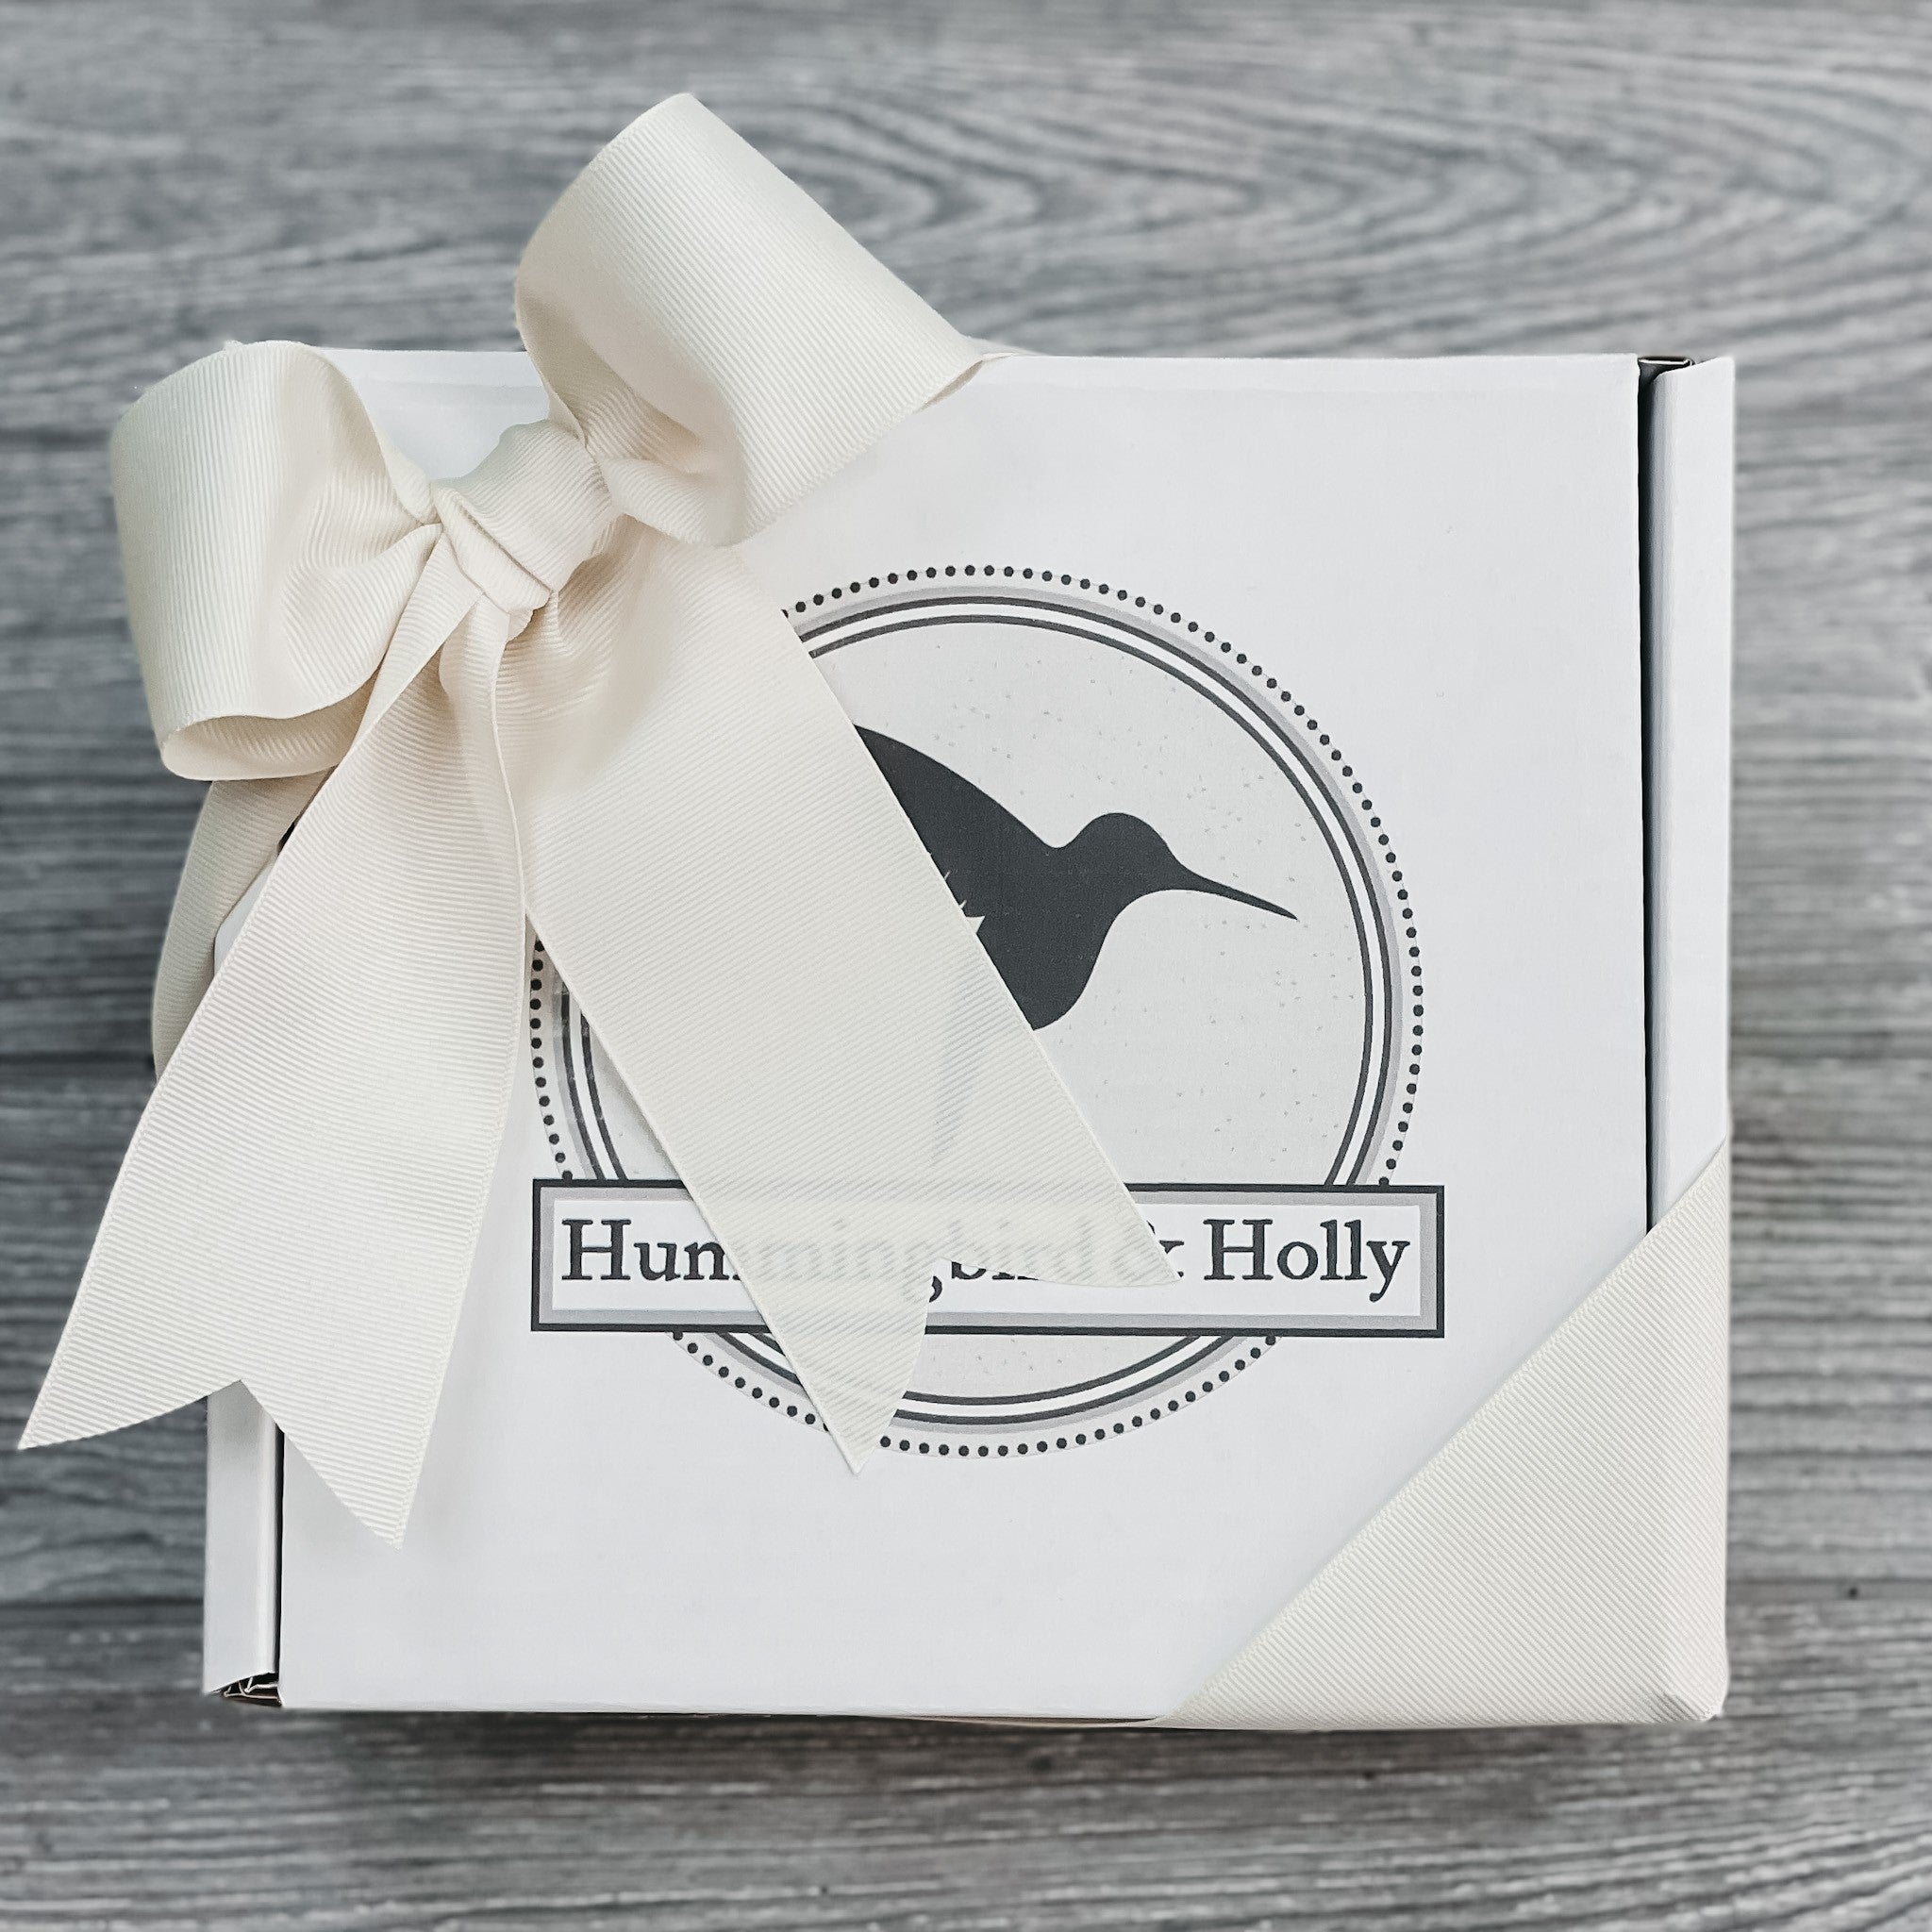 closeup of 8 inch by 8 inch gift box with Hummingbird and Holly logo